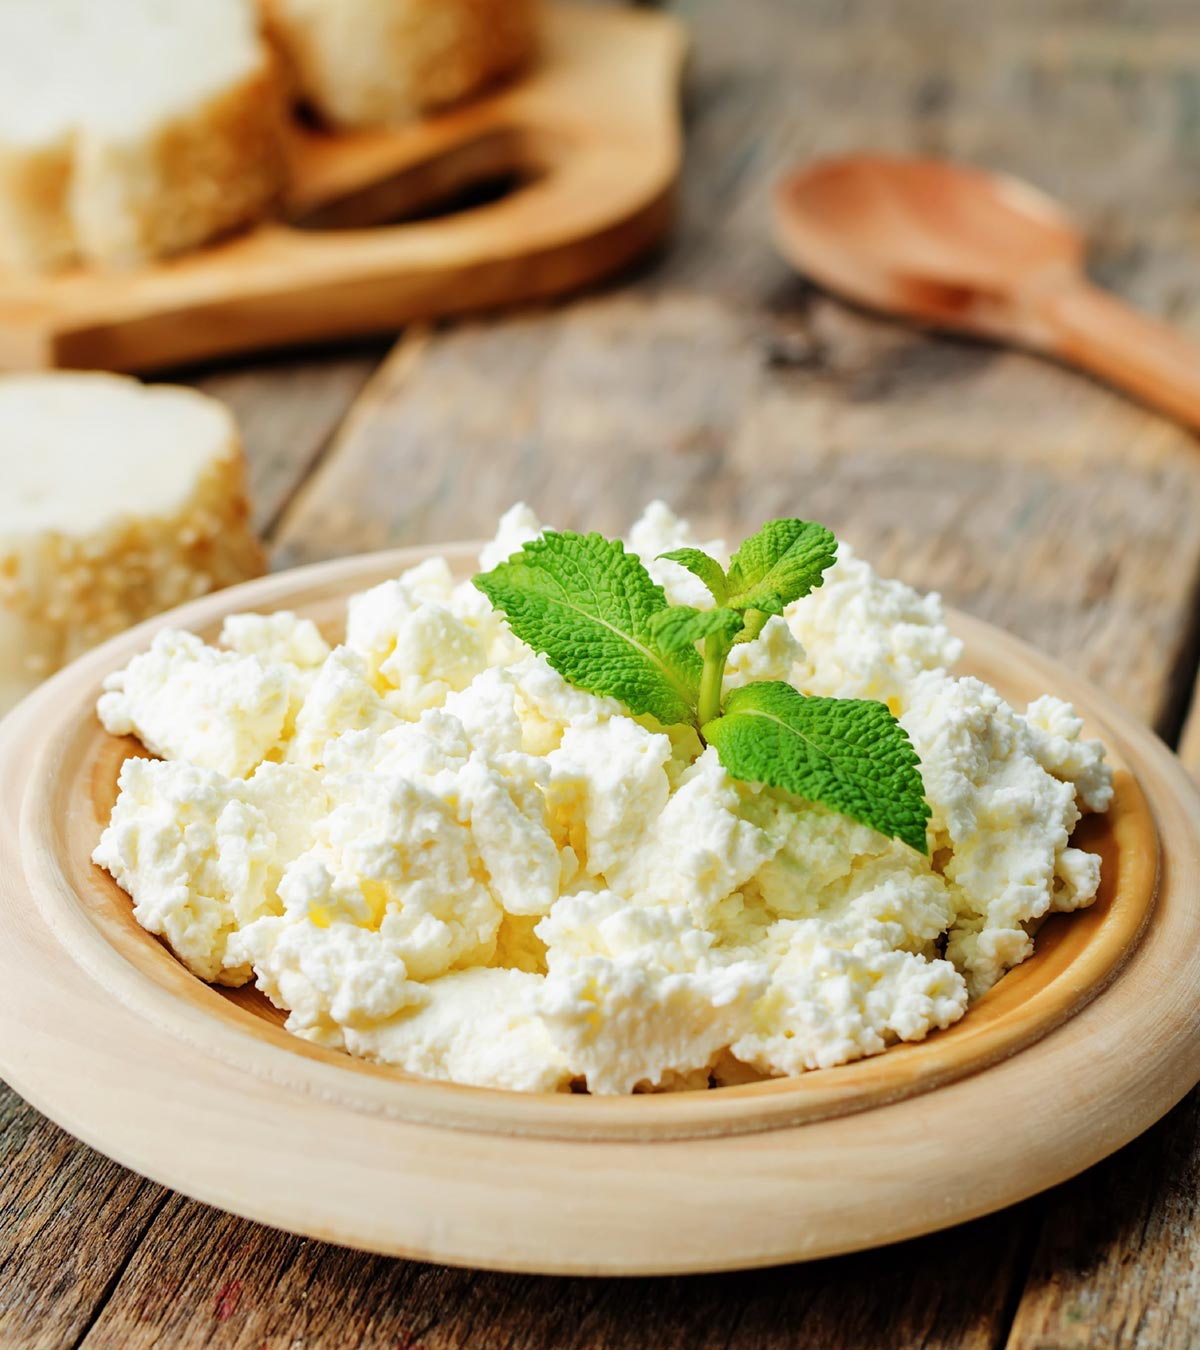 Is It Safe To Eat Ricotta Cheese When Pregnant